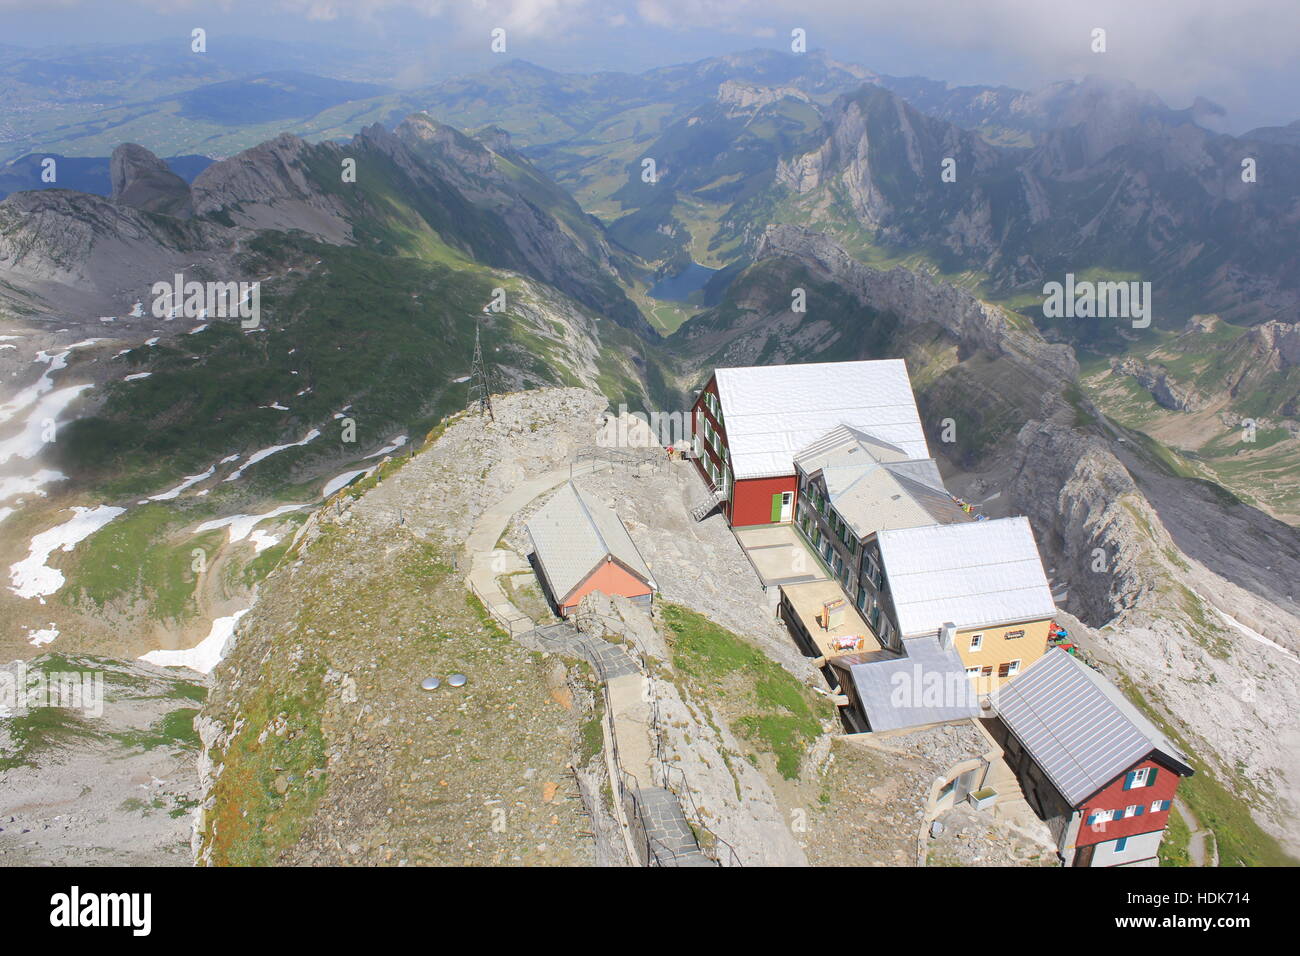 Looking down on a homestead as seen from the peak of Switzerland's Säntis Mountain in the Swiss Alps. Stock Photo